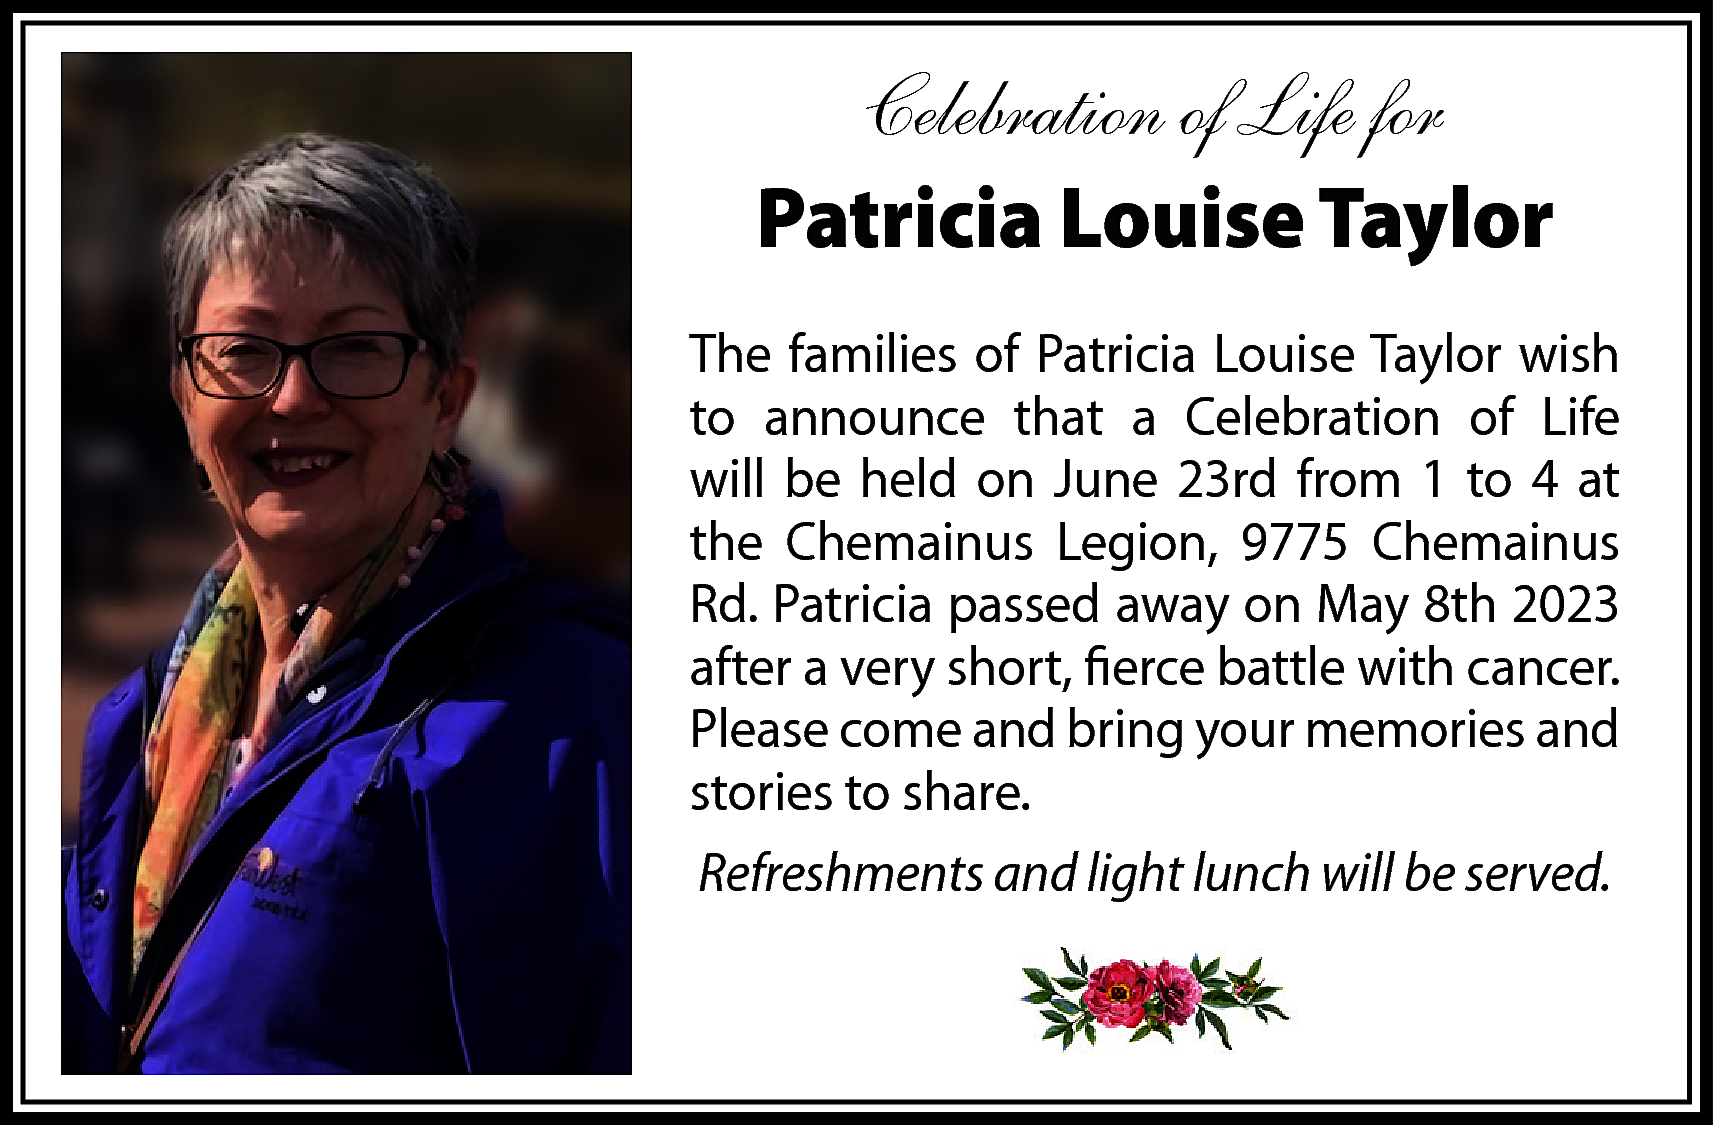 Celebration of Life for <br>Patricia  Celebration of Life for  Patricia Louise Taylor  The families of Patricia Louise Taylor wish  to announce that a Celebration of Life  will be held on June 23rd from 1 to 4 at  the Chemainus Legion, 9775 Chemainus  Rd. Patricia passed away on May 8th 2023  after a very short, fierce battle with cancer.  Please come and bring your memories and  stories to share.  Refreshments and light lunch will be served.    